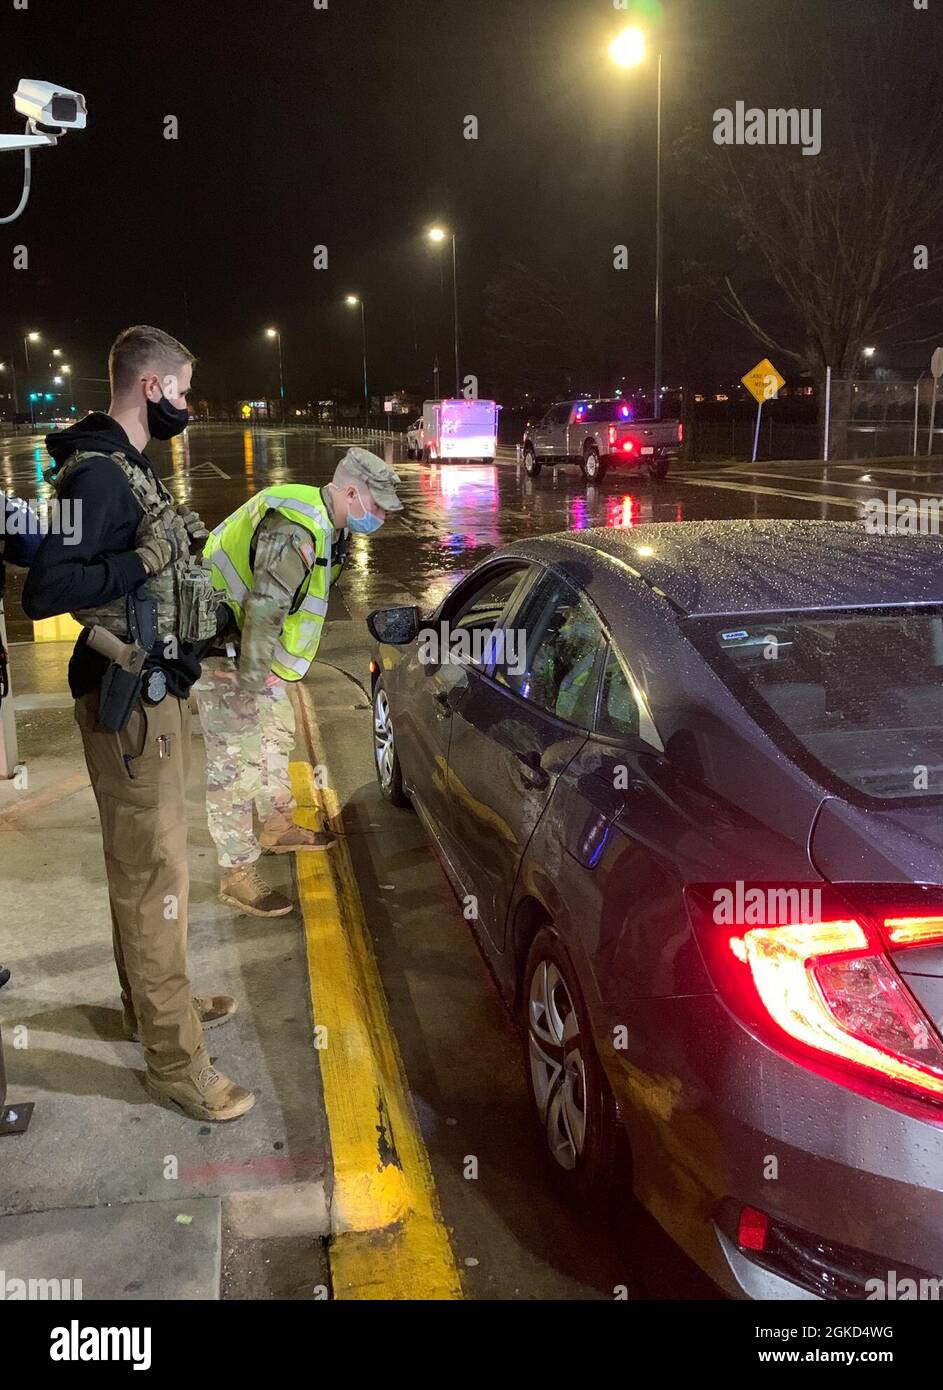 Specialist Jaxon Wright, 163rd Military Police Detachment, 716th Military Police Battalion, speaks with a driver March 17 at a sobriety checkpoint on Fort Campbell. Also pictured is Investigator Avery Neitzel, 163rd MP Co. According to the National Highway Traffic Safety Administration, 28 people in the U.S. die in drunk driving crashes each day. Fort Campbell hasn’t added onto that statistic in 2021, and the PMO’s sobriety checkpoints may be a factor. Stock Photo